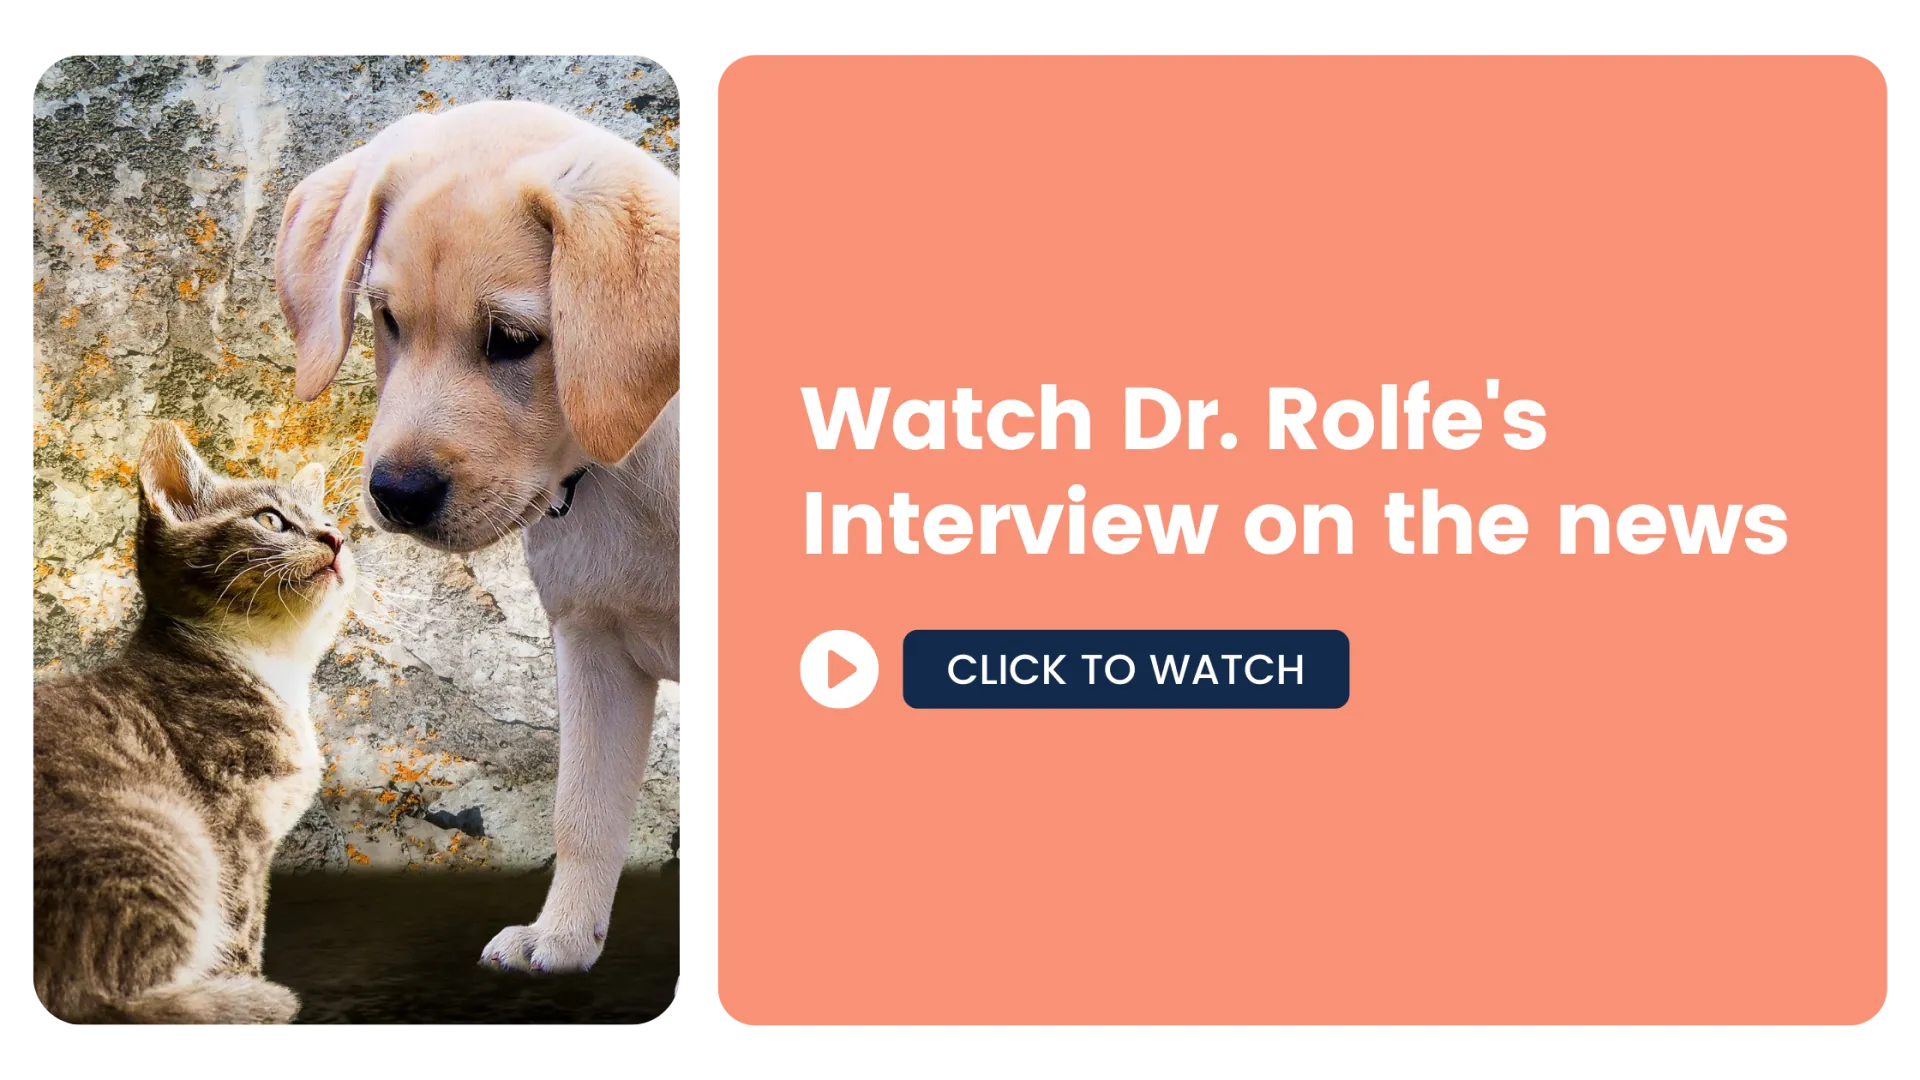 Watch Dr. Rolfe's Interview on the news: Click to Watch